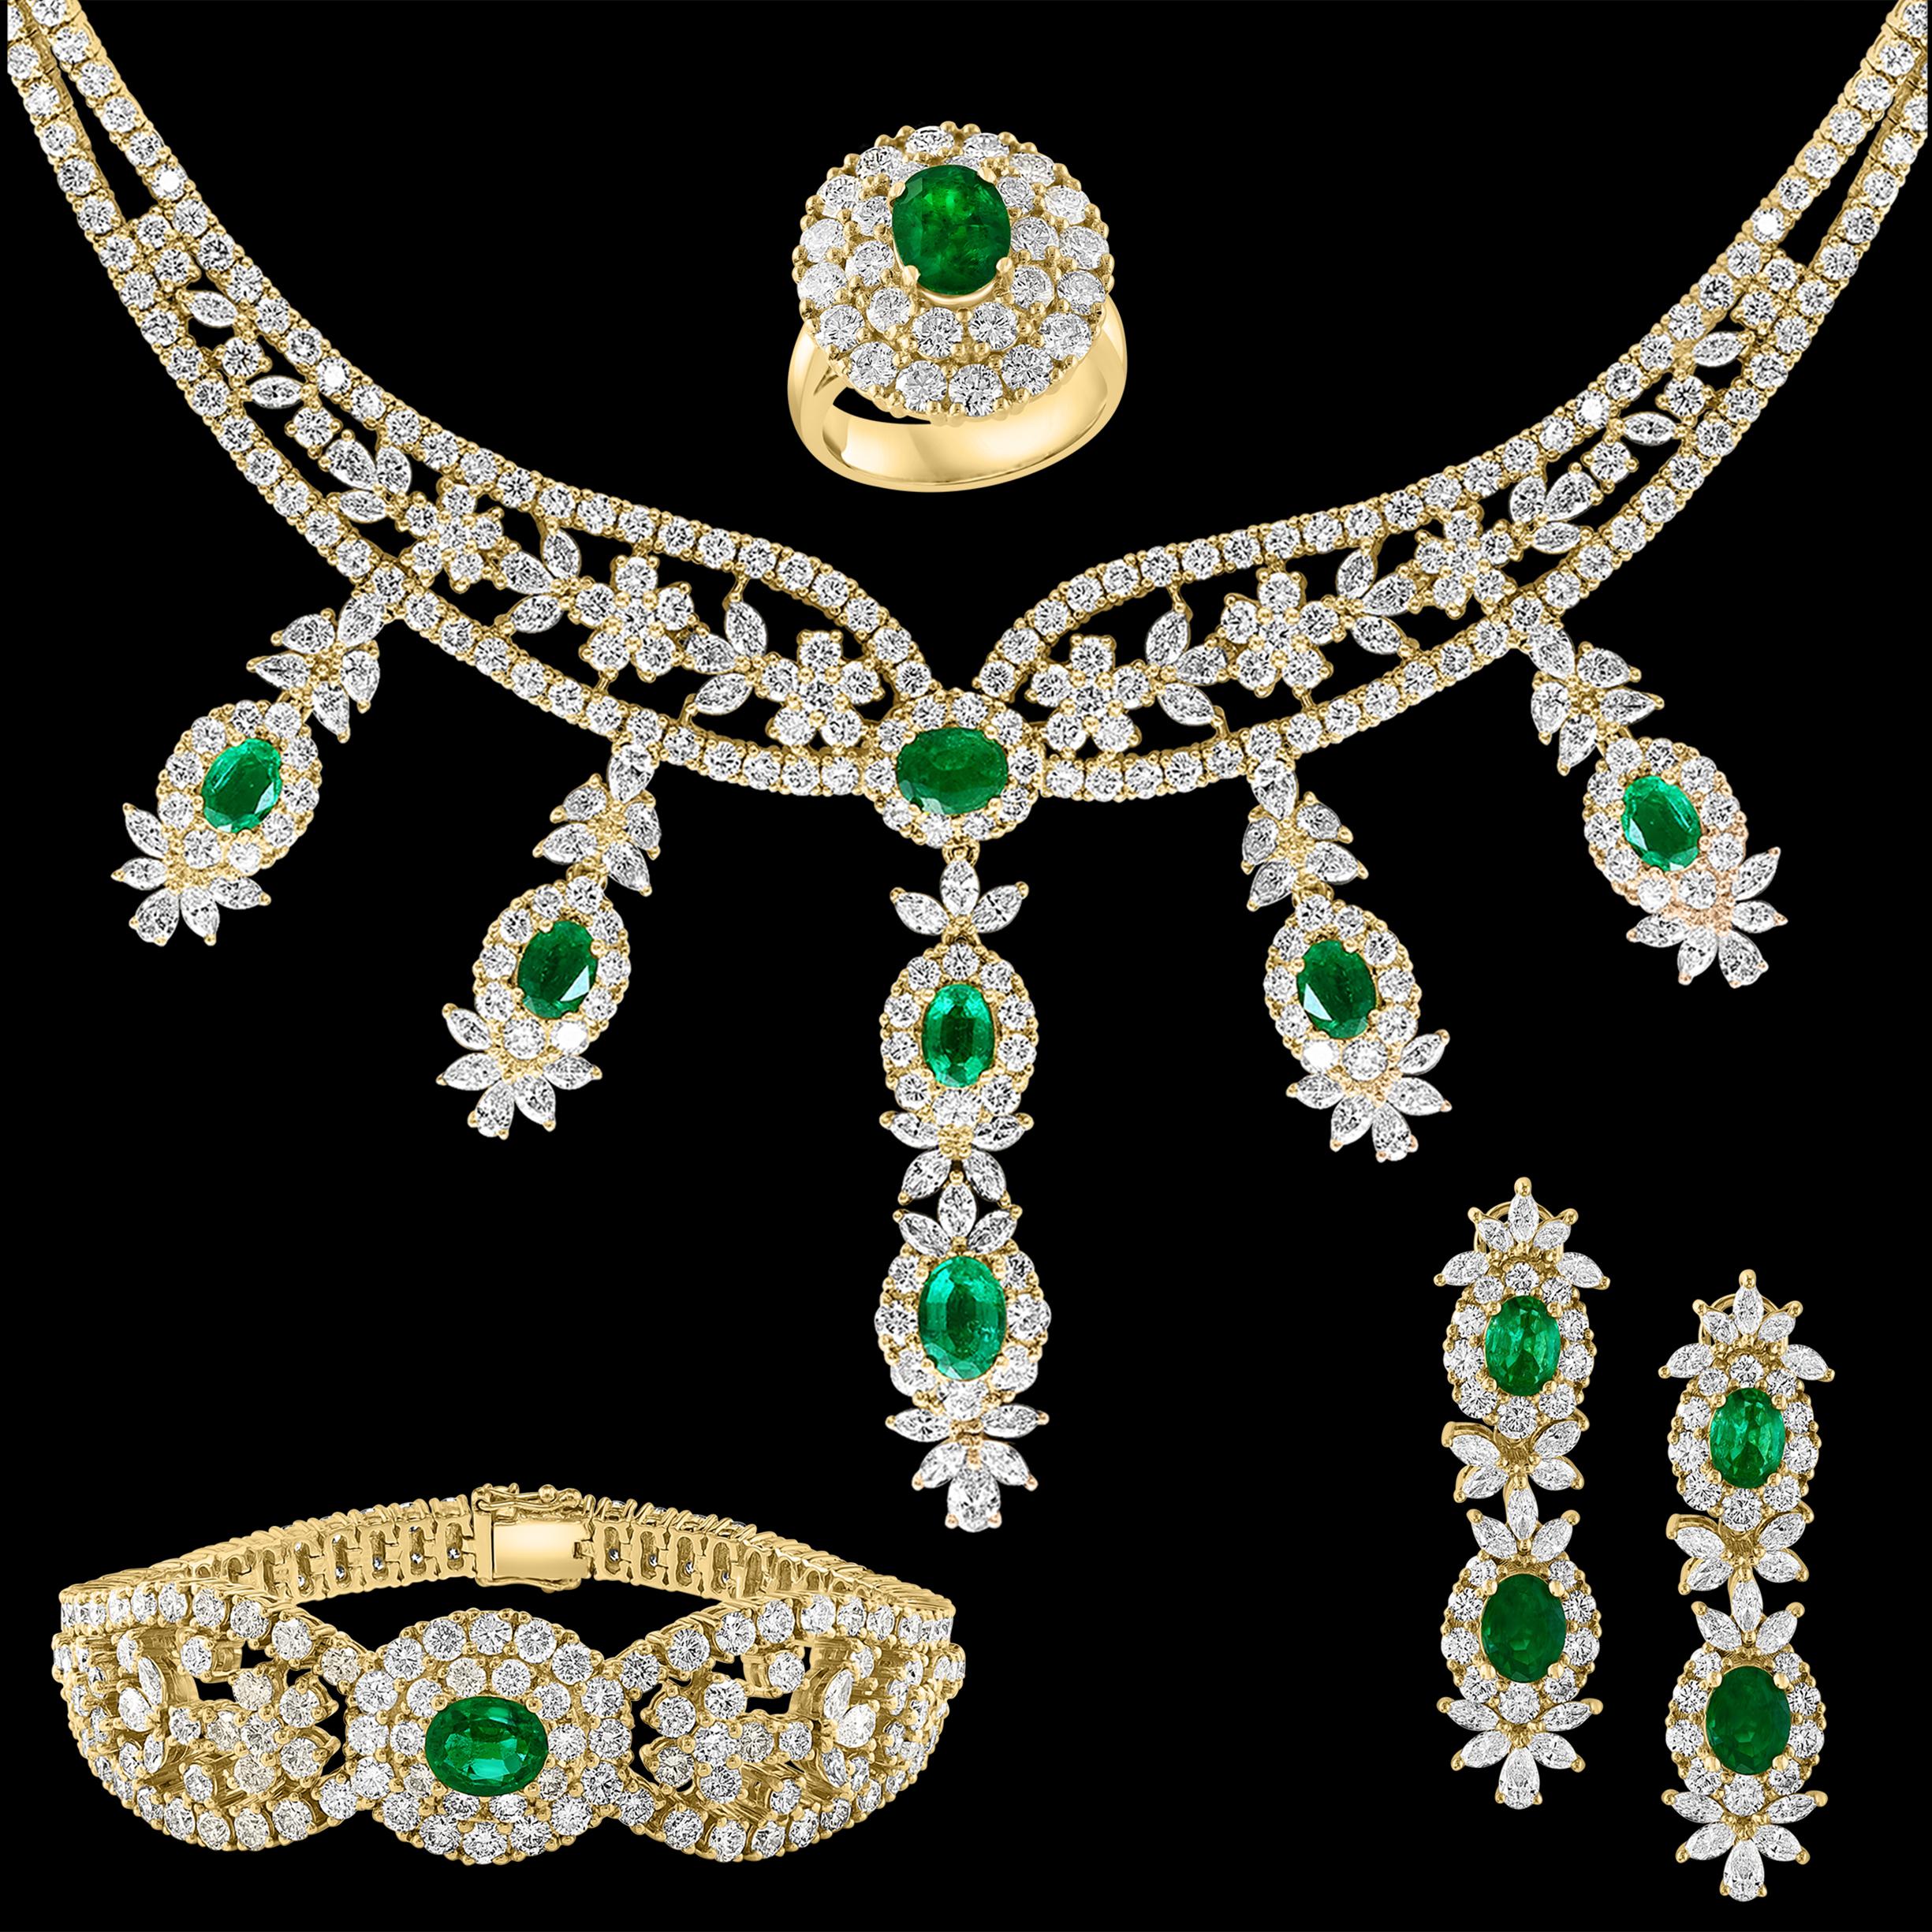 GIA Certified  Natural Finest Zambian Emeralds & 95 Carat Diamonds 4 Piece Set  Necklace, Bracelet , Earring and Ring Suite 18 Karat Yellow Gold 253 Gm Signed Marconi
Necklace consisting of 7 solitaire  natural Emeralds. There are total 13 emeralds